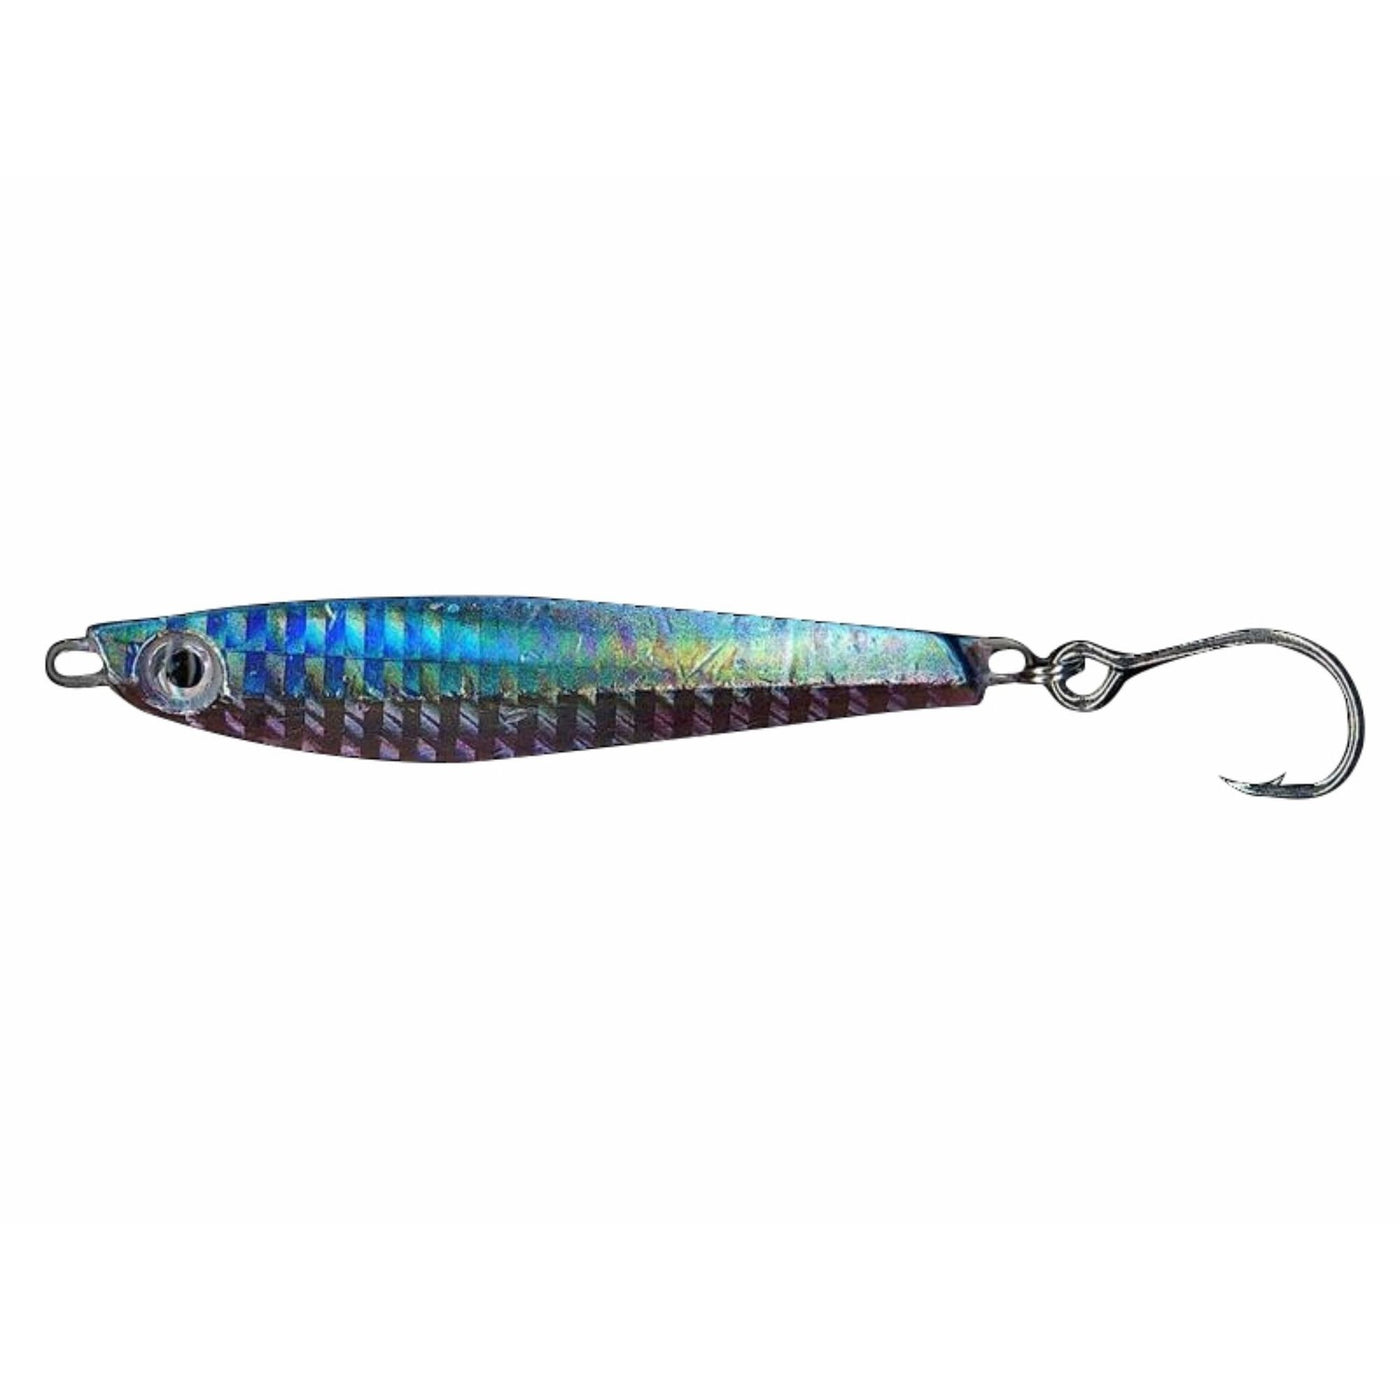 Acme Kastmaster Tube Tail Lures